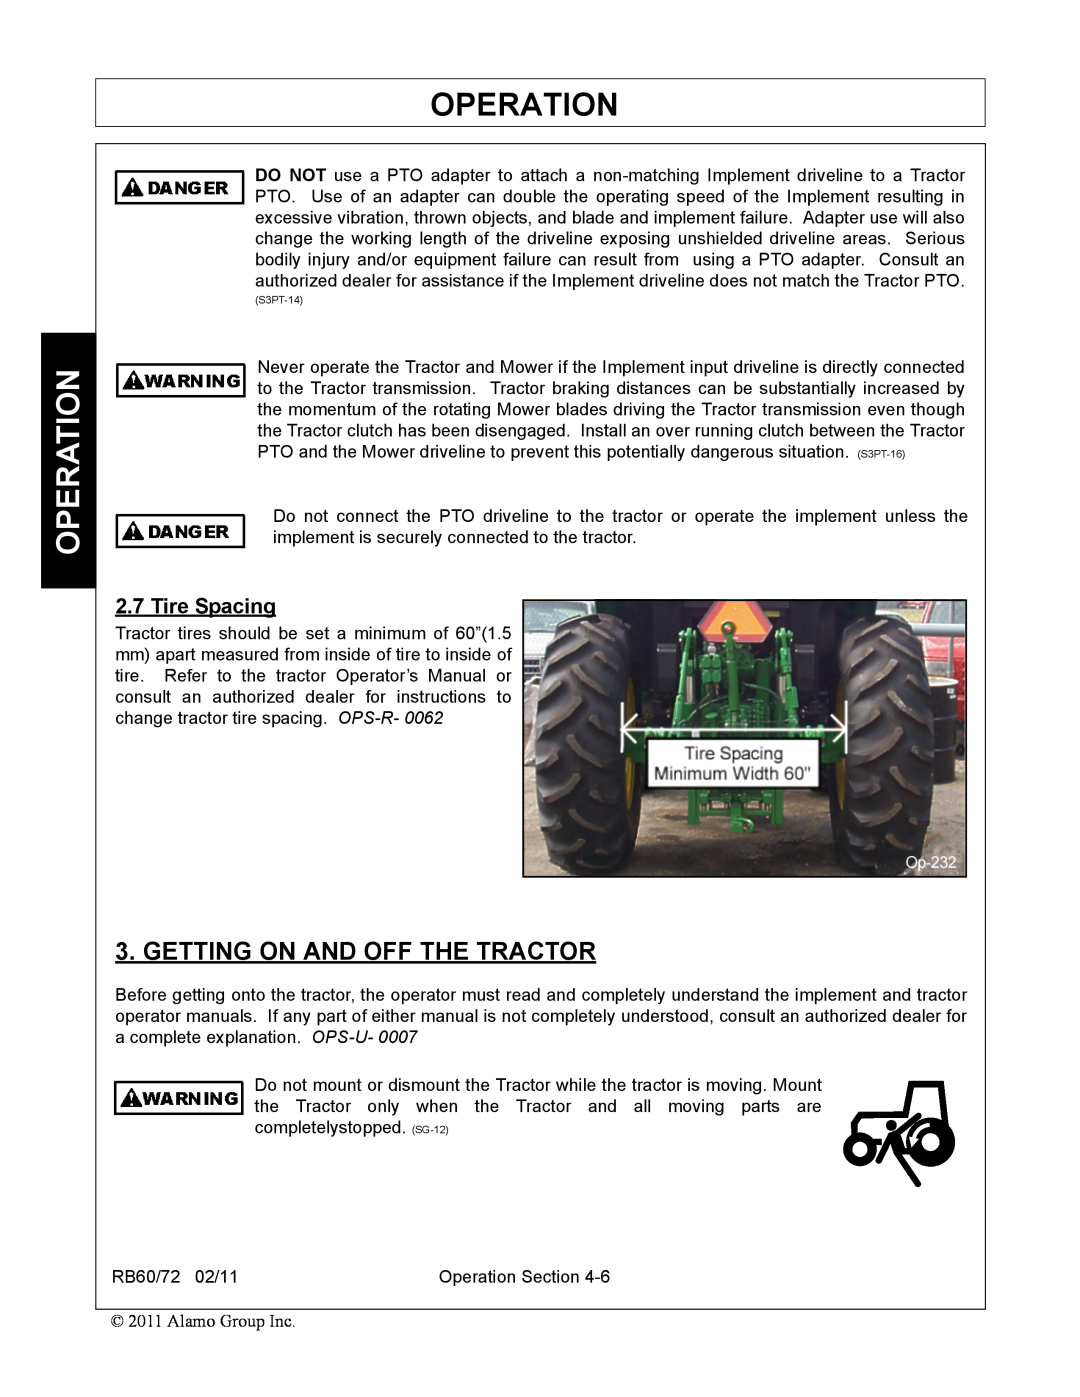 Blue Rhino RB60/72 manual Getting On And Off The Tractor, Operation, Tire Spacing 